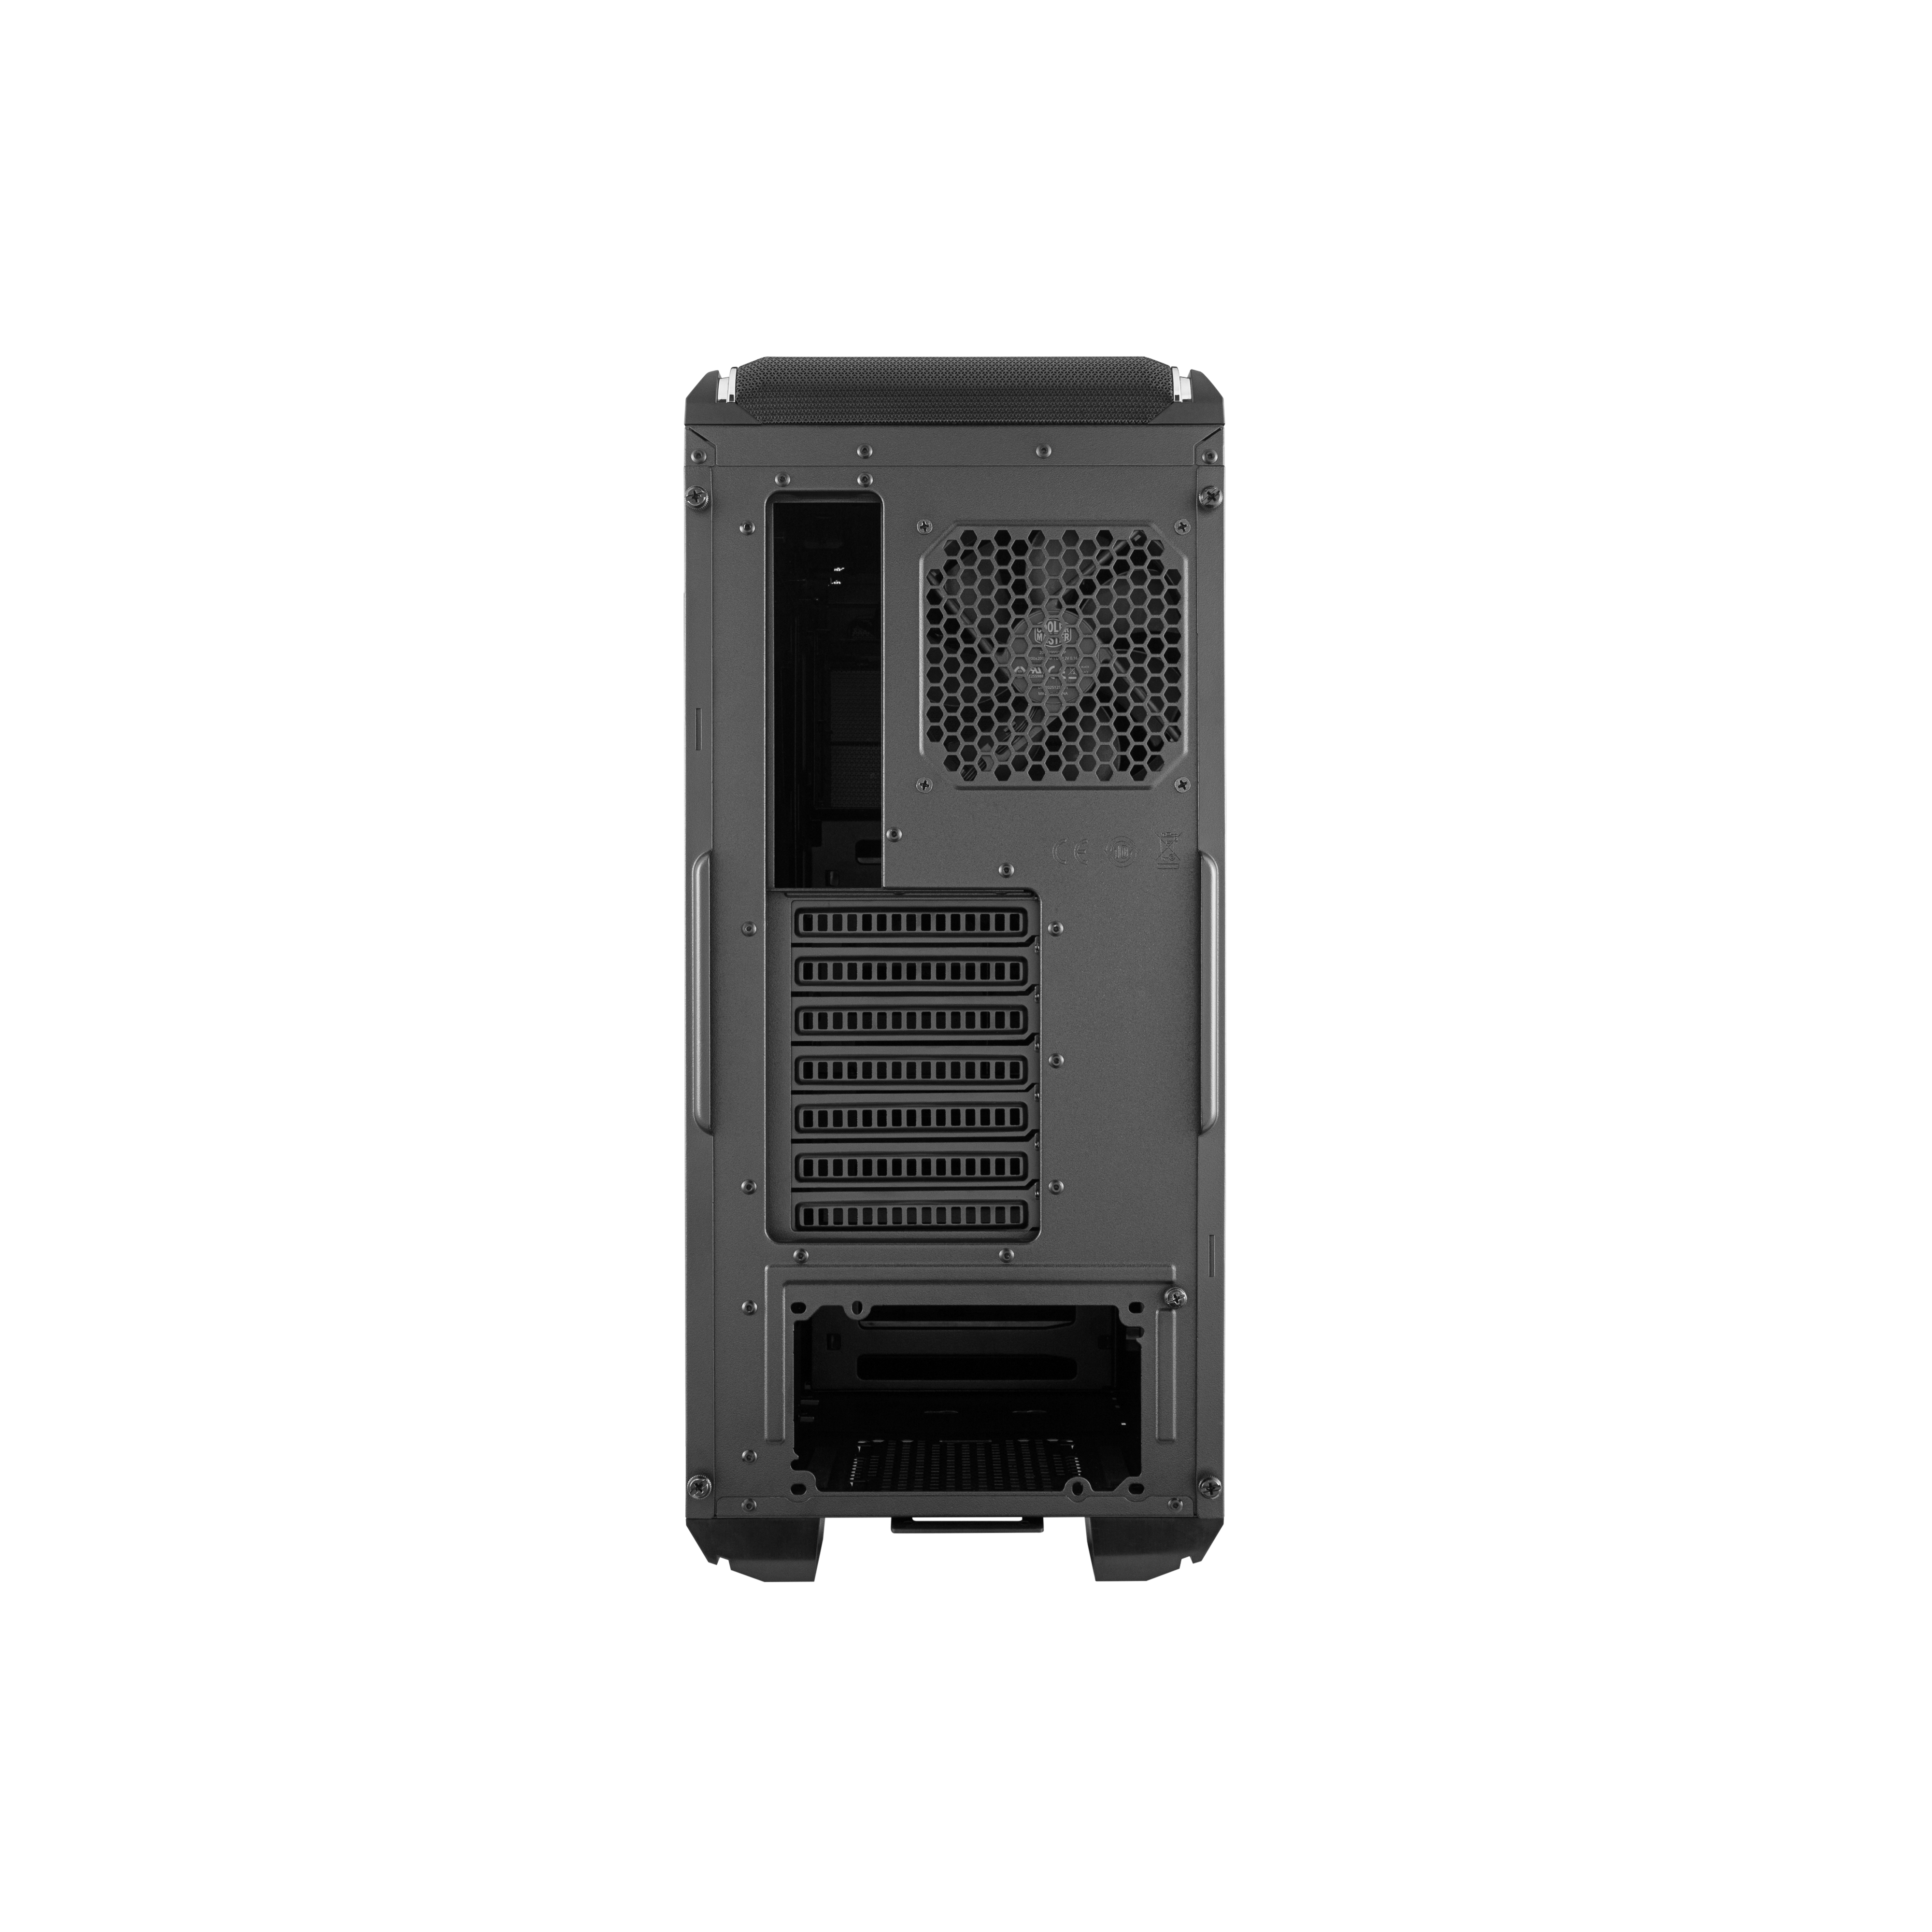 MasterBox CM694 Mid Tower PC Case | Cooler Master USA